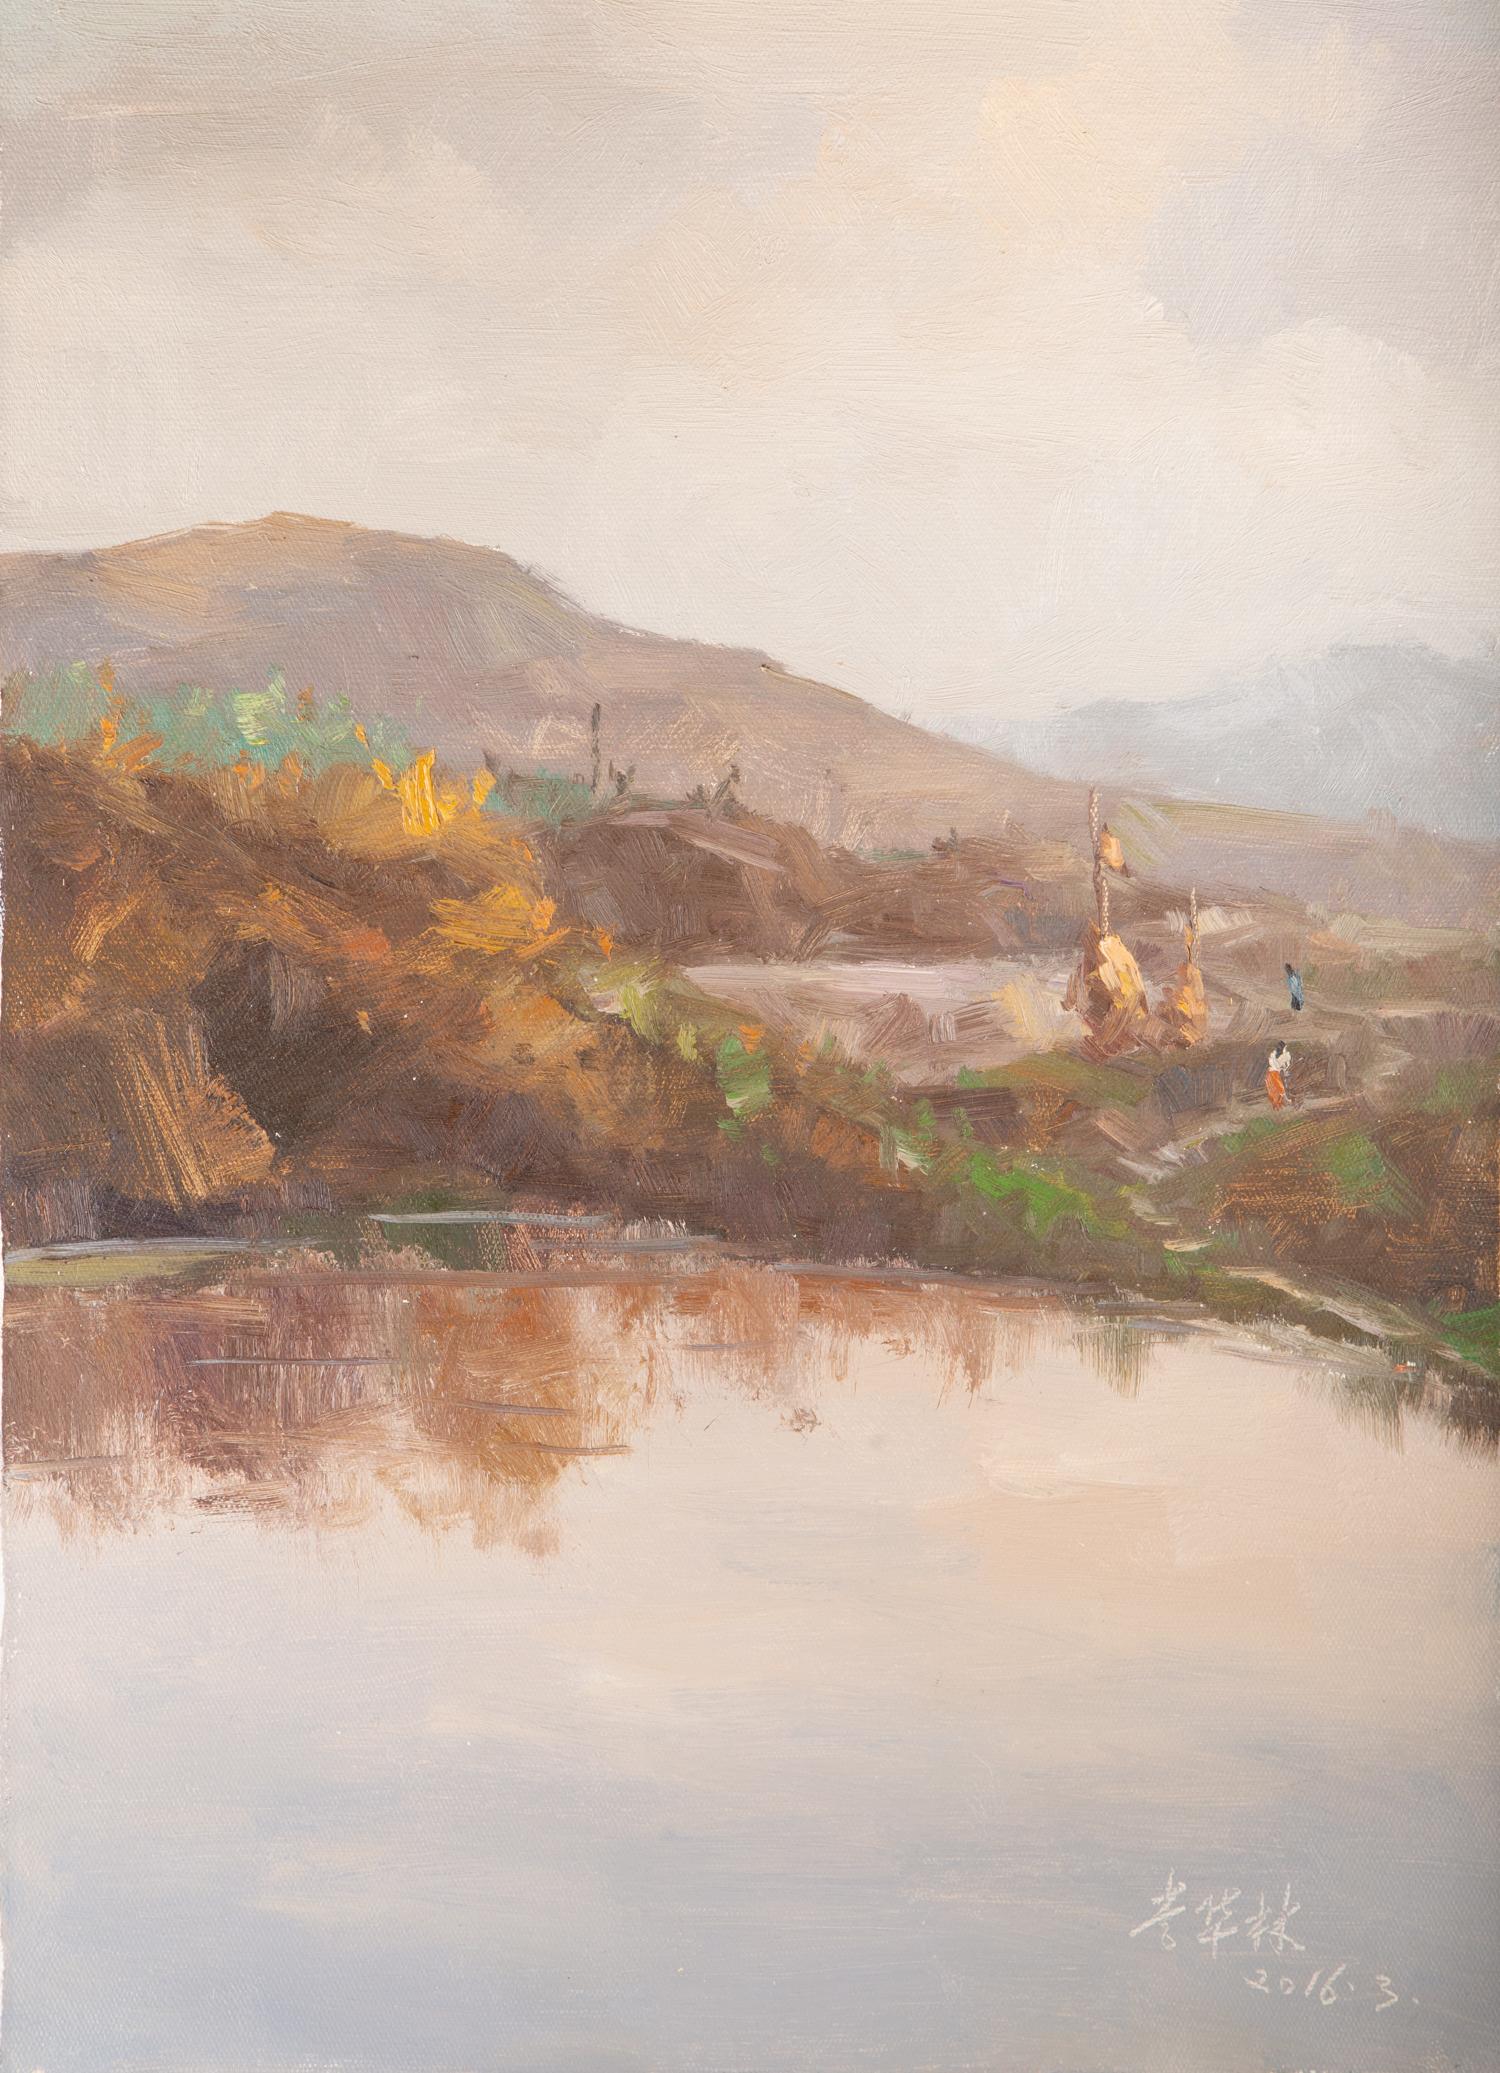  Title: Lake Reflection
 Medium: Oil on canvas
 Size: 19.5 x 27.25inches
 Frame: Framing options available!
 Age: 2000s
 Condition: Painting appears to be in excellent condition.
 Note: This painting is unstretched
 Artist: Hualin Li
 Provenance: